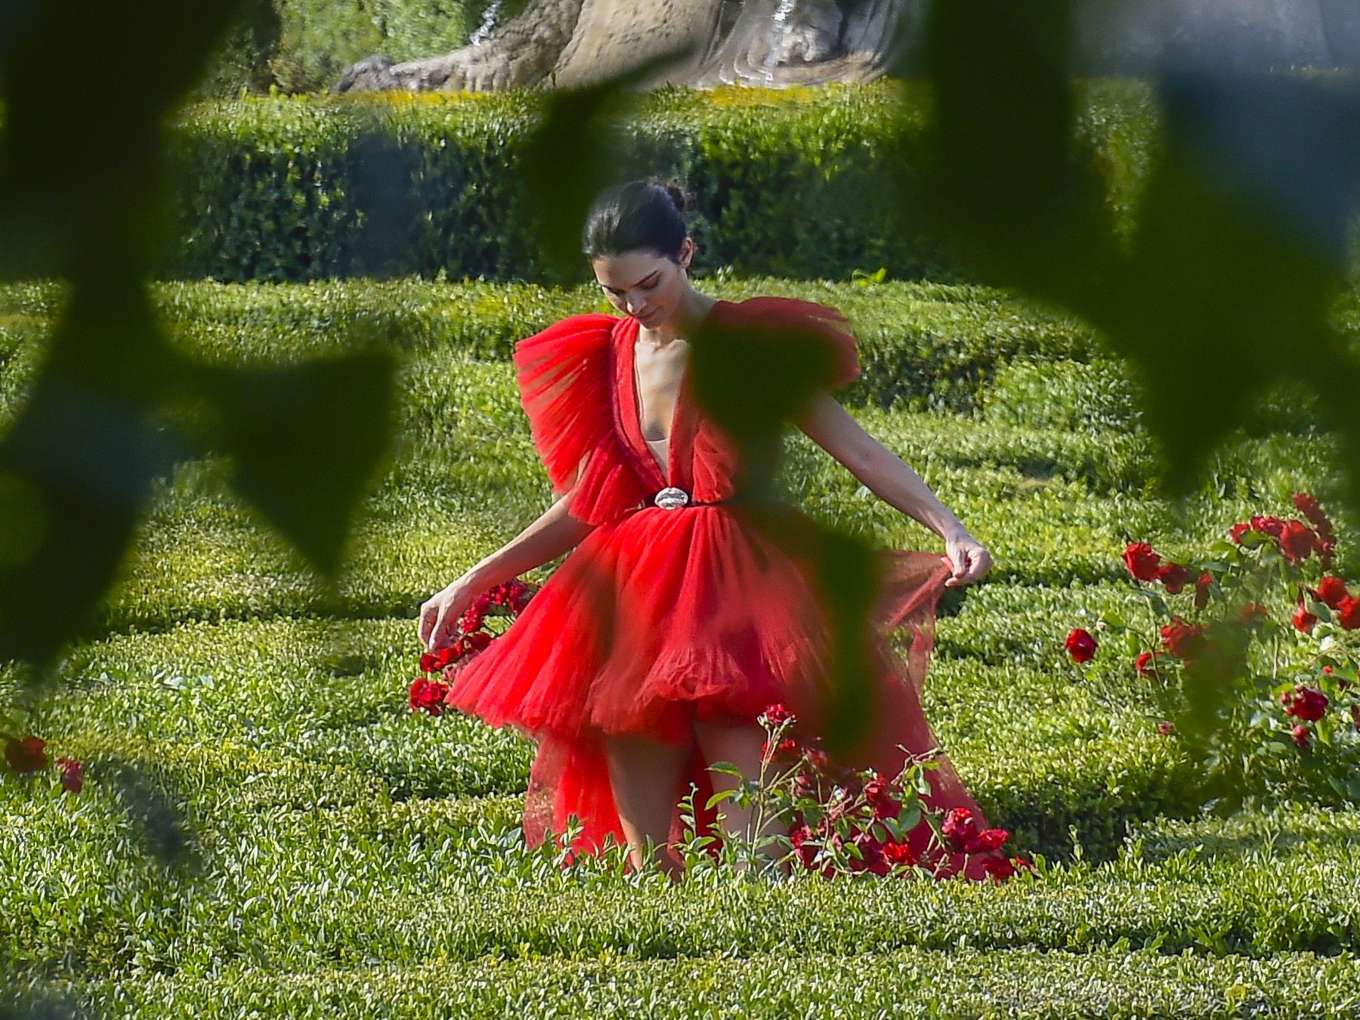 Kendall Jenner in Red Dress: On set of a photoshoot-32 | GotCeleb